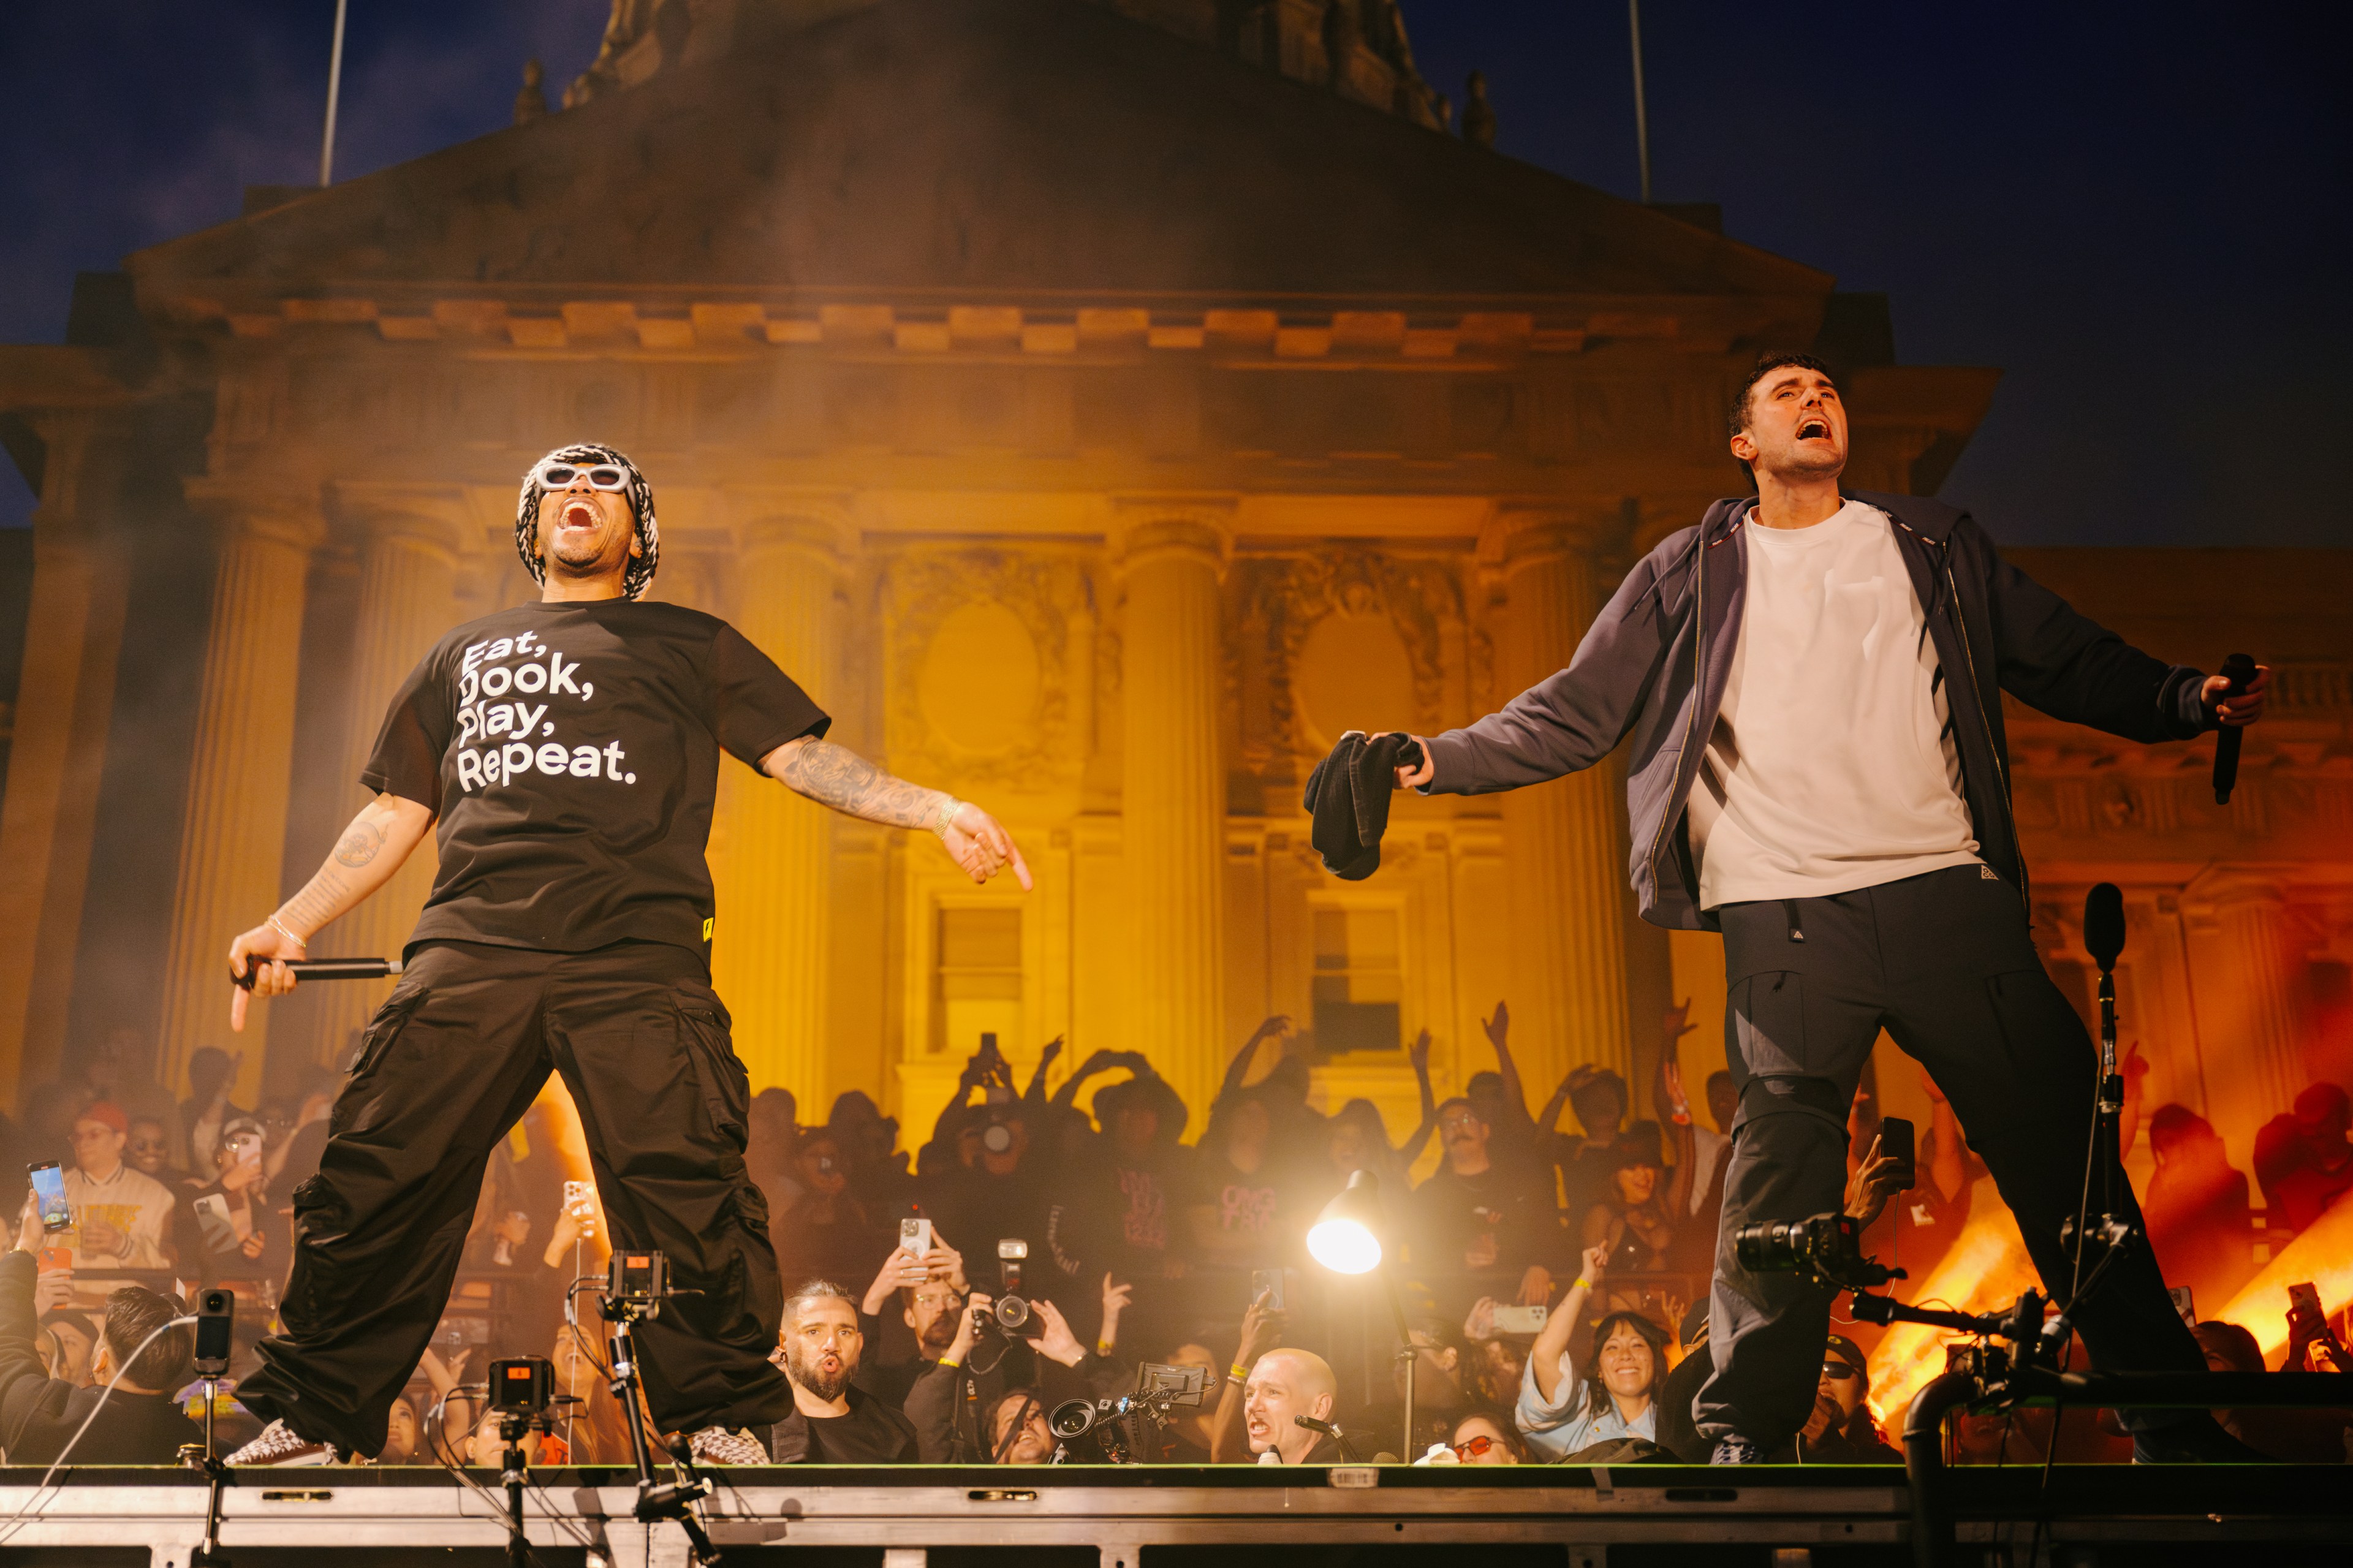 Two performers on stage with a lit-up grand building behind them, surrounded by a cheering crowd. One wears a T-shirt saying &quot;Eat, Boop, Play, Repeat.&quot; both hold microphones.